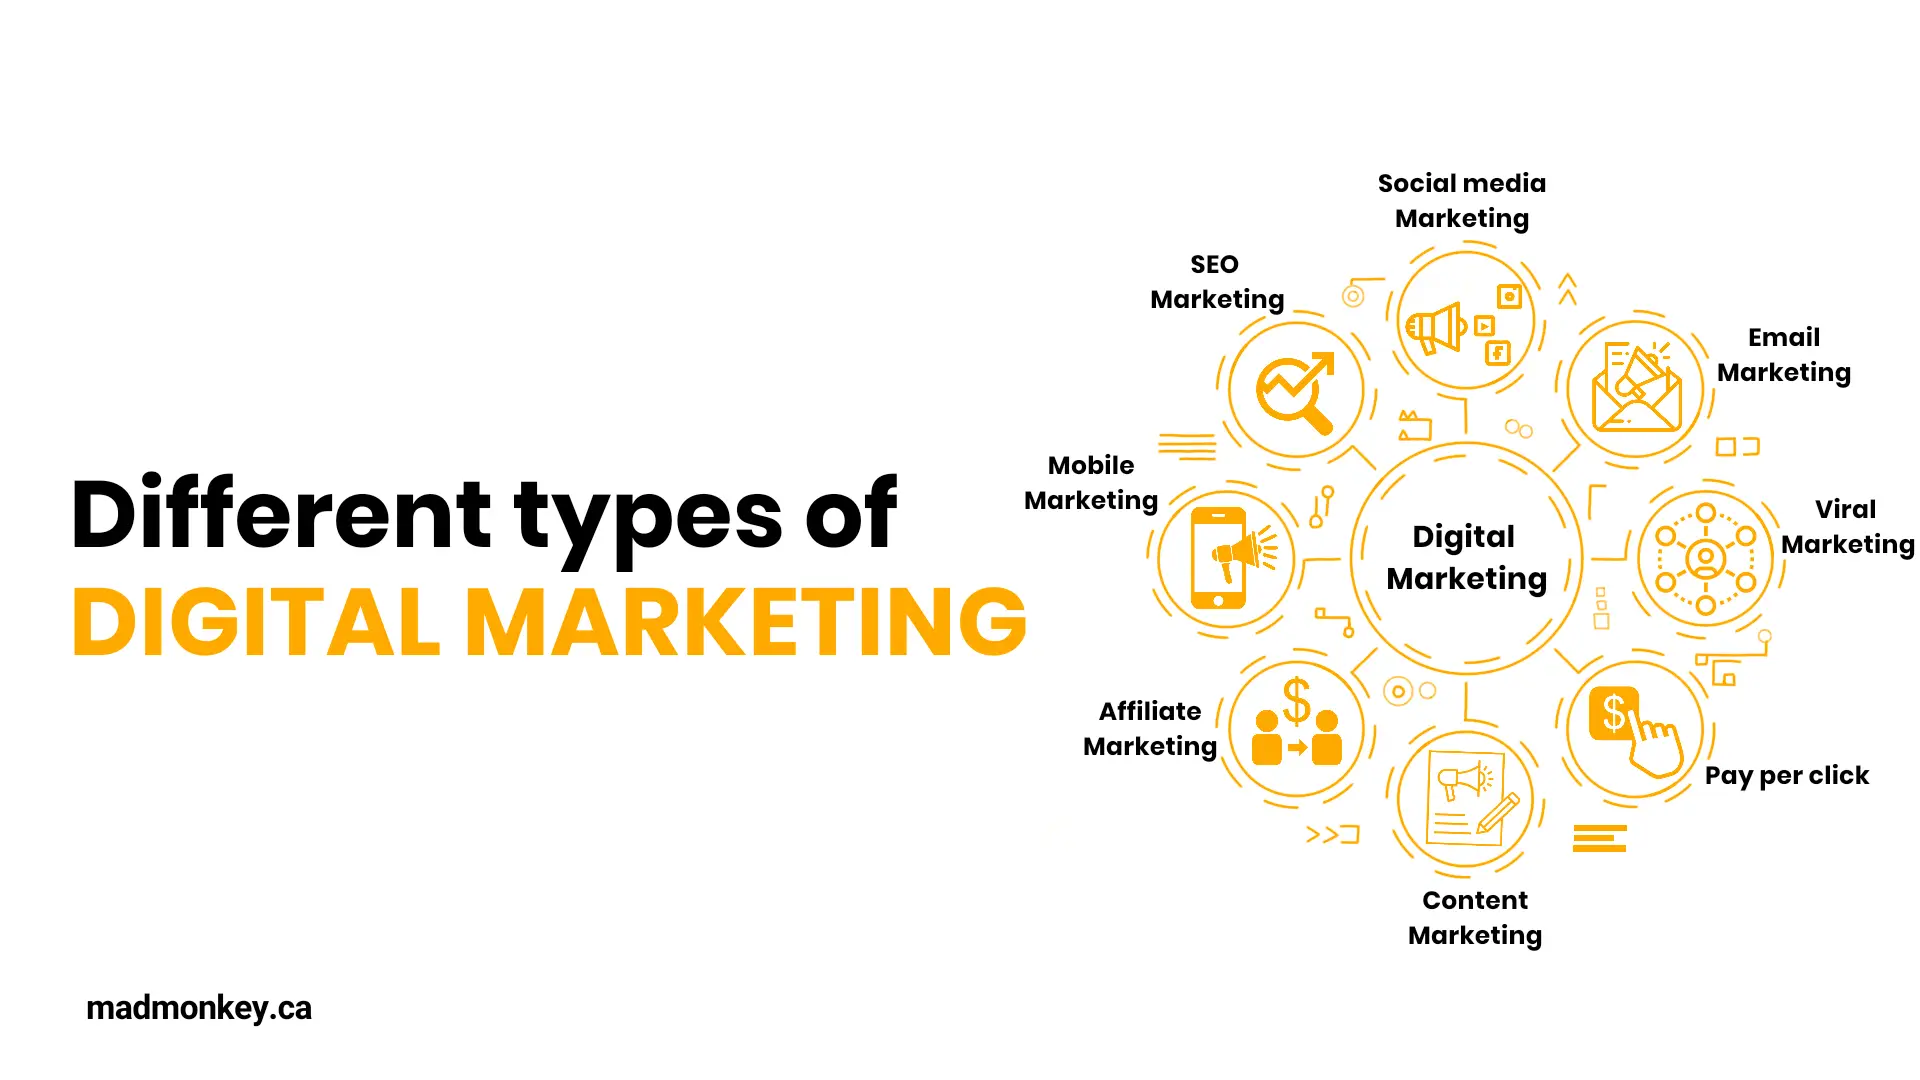 A flow chart showing different types of digital marketing